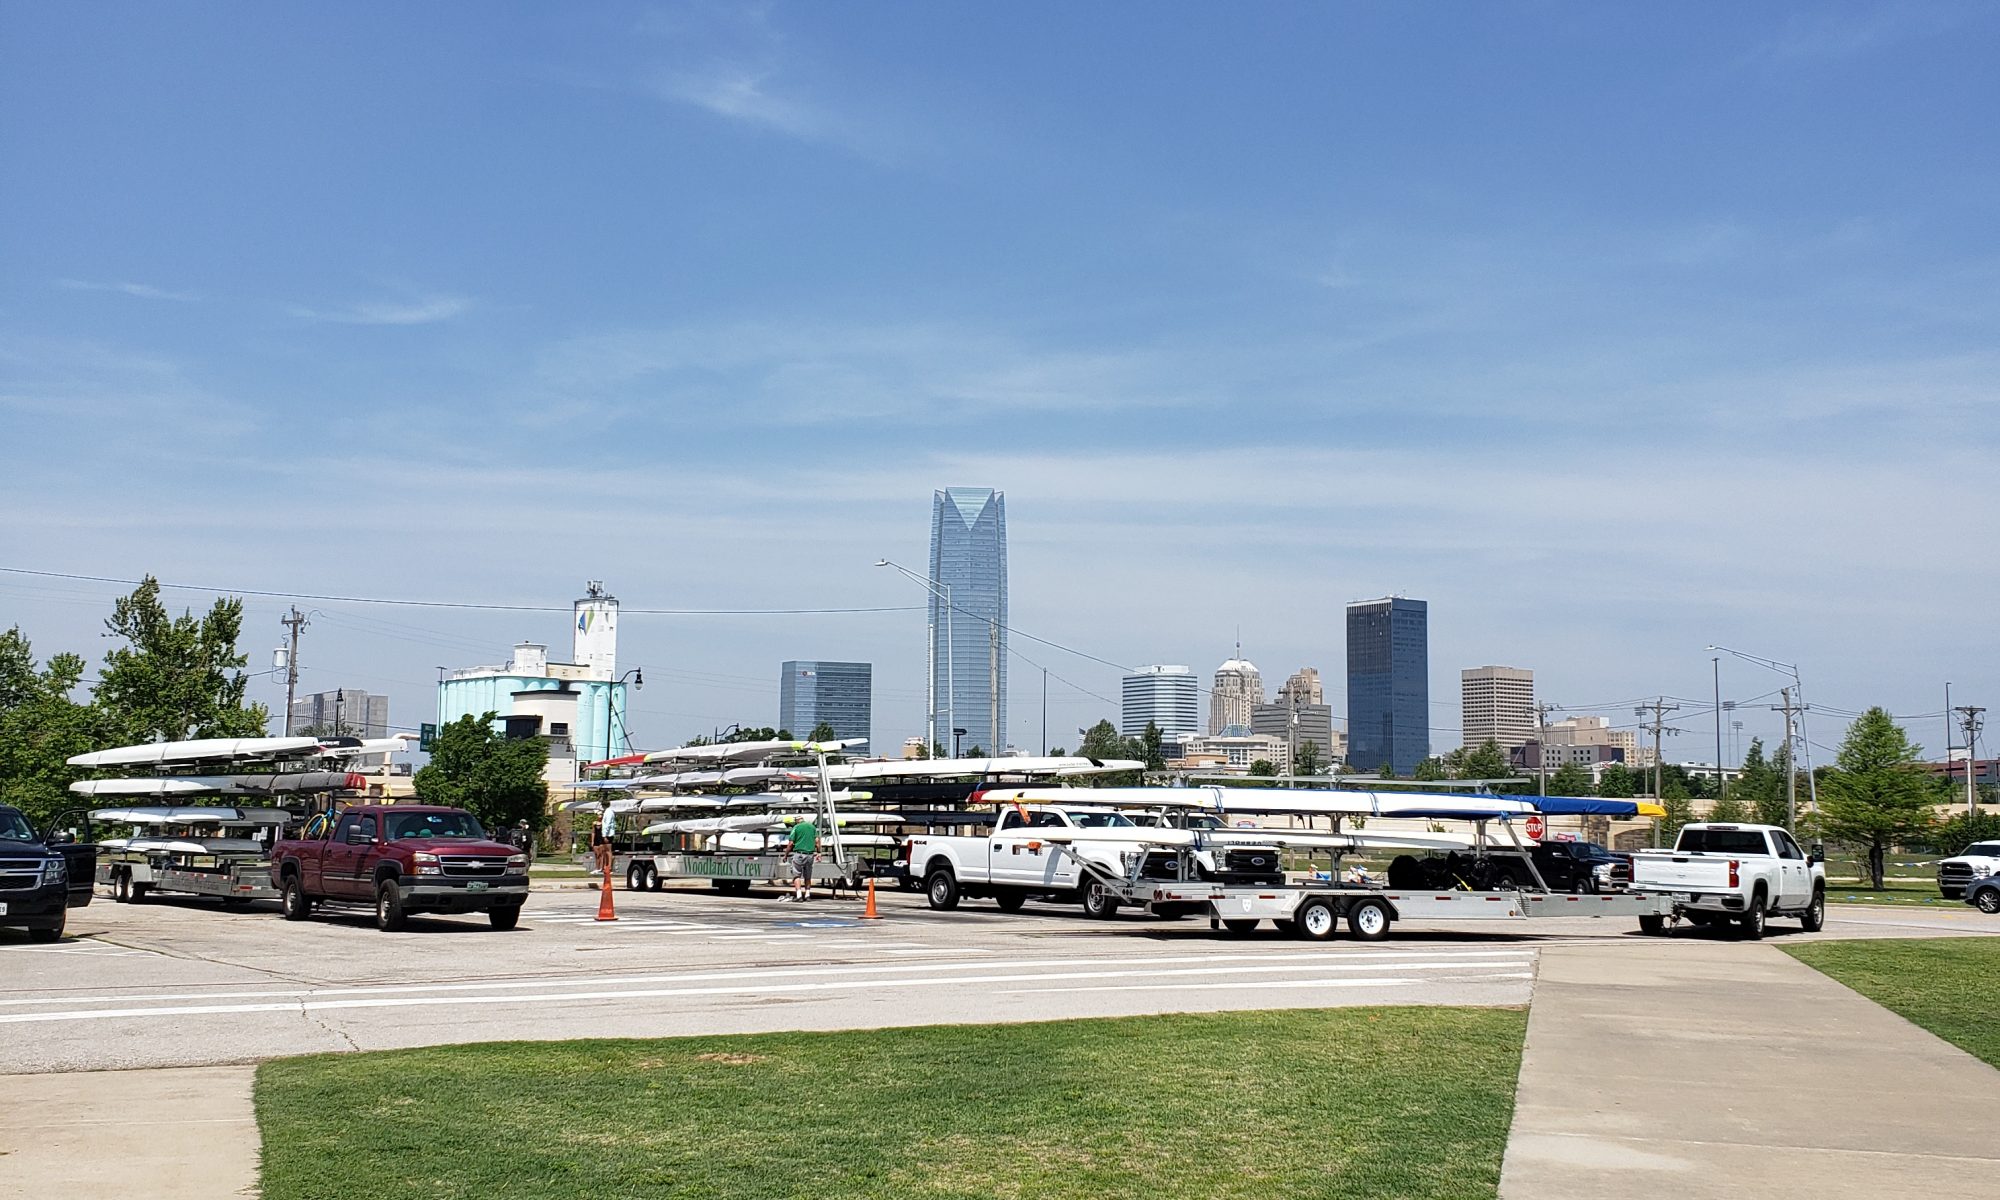 The OKC skyline forms a backdrop for a line of parked racing boat trailers.